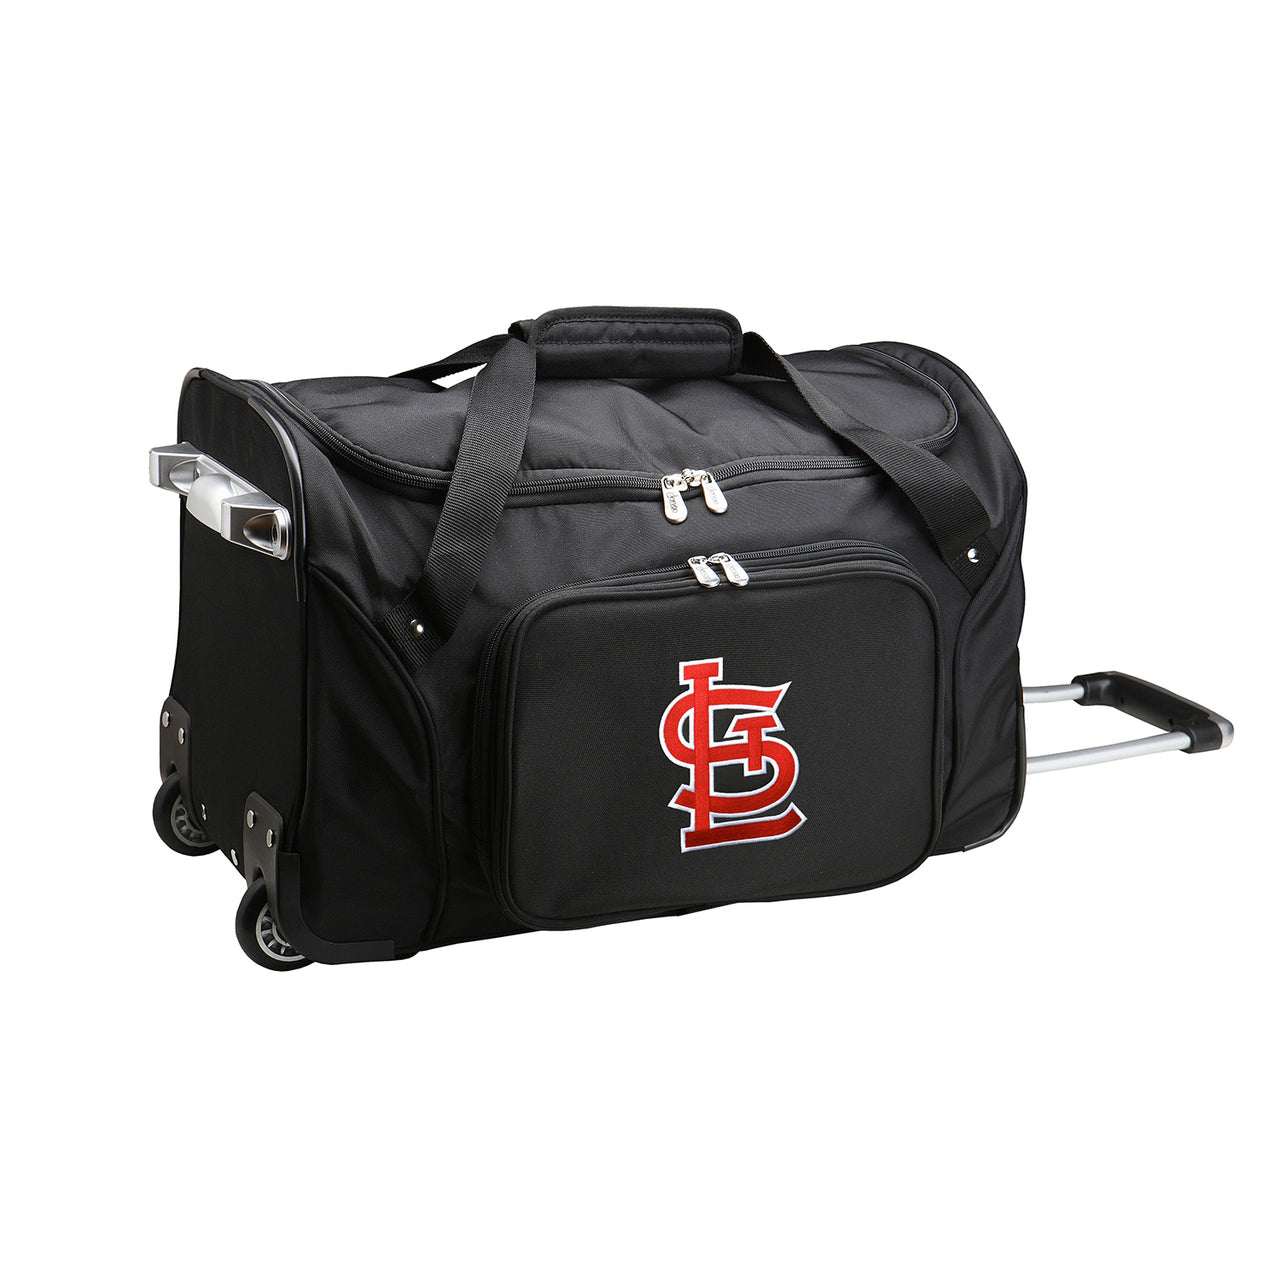 MLB St Louis Cardinals Luggage | MLB St Louis Cardinals Wheeled Carry On Luggage